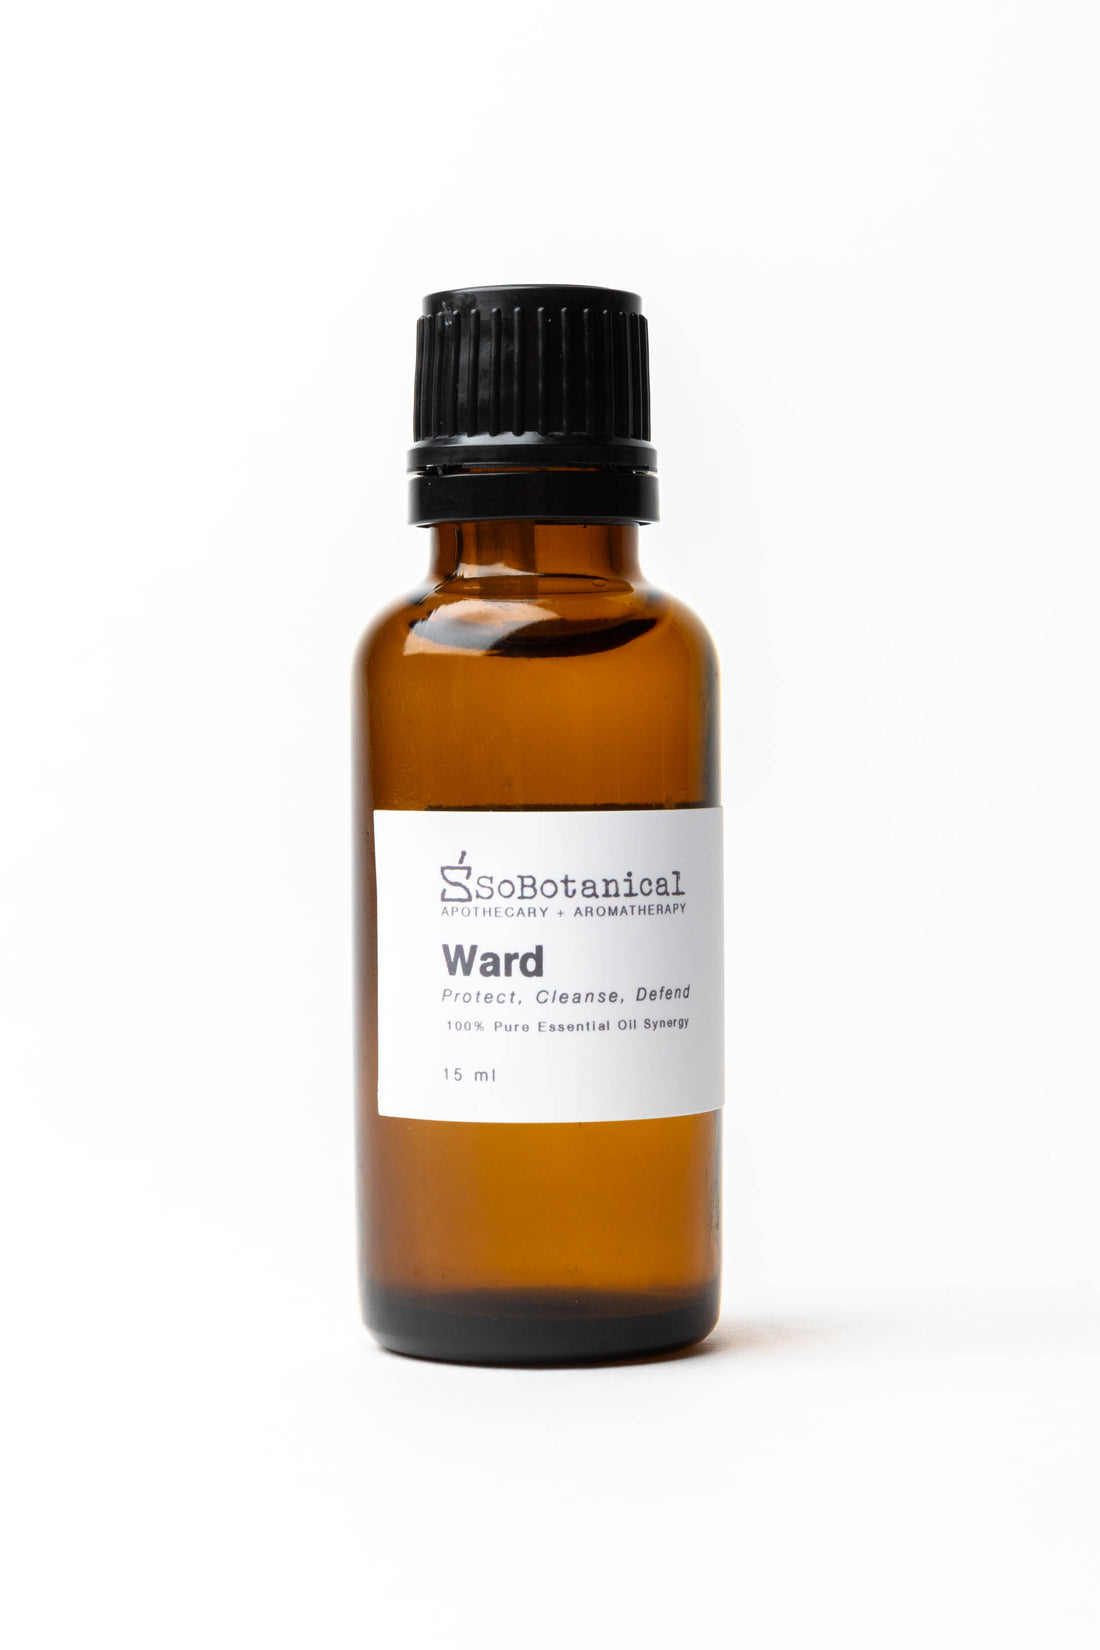 Ward (Classic Thieves Blend)